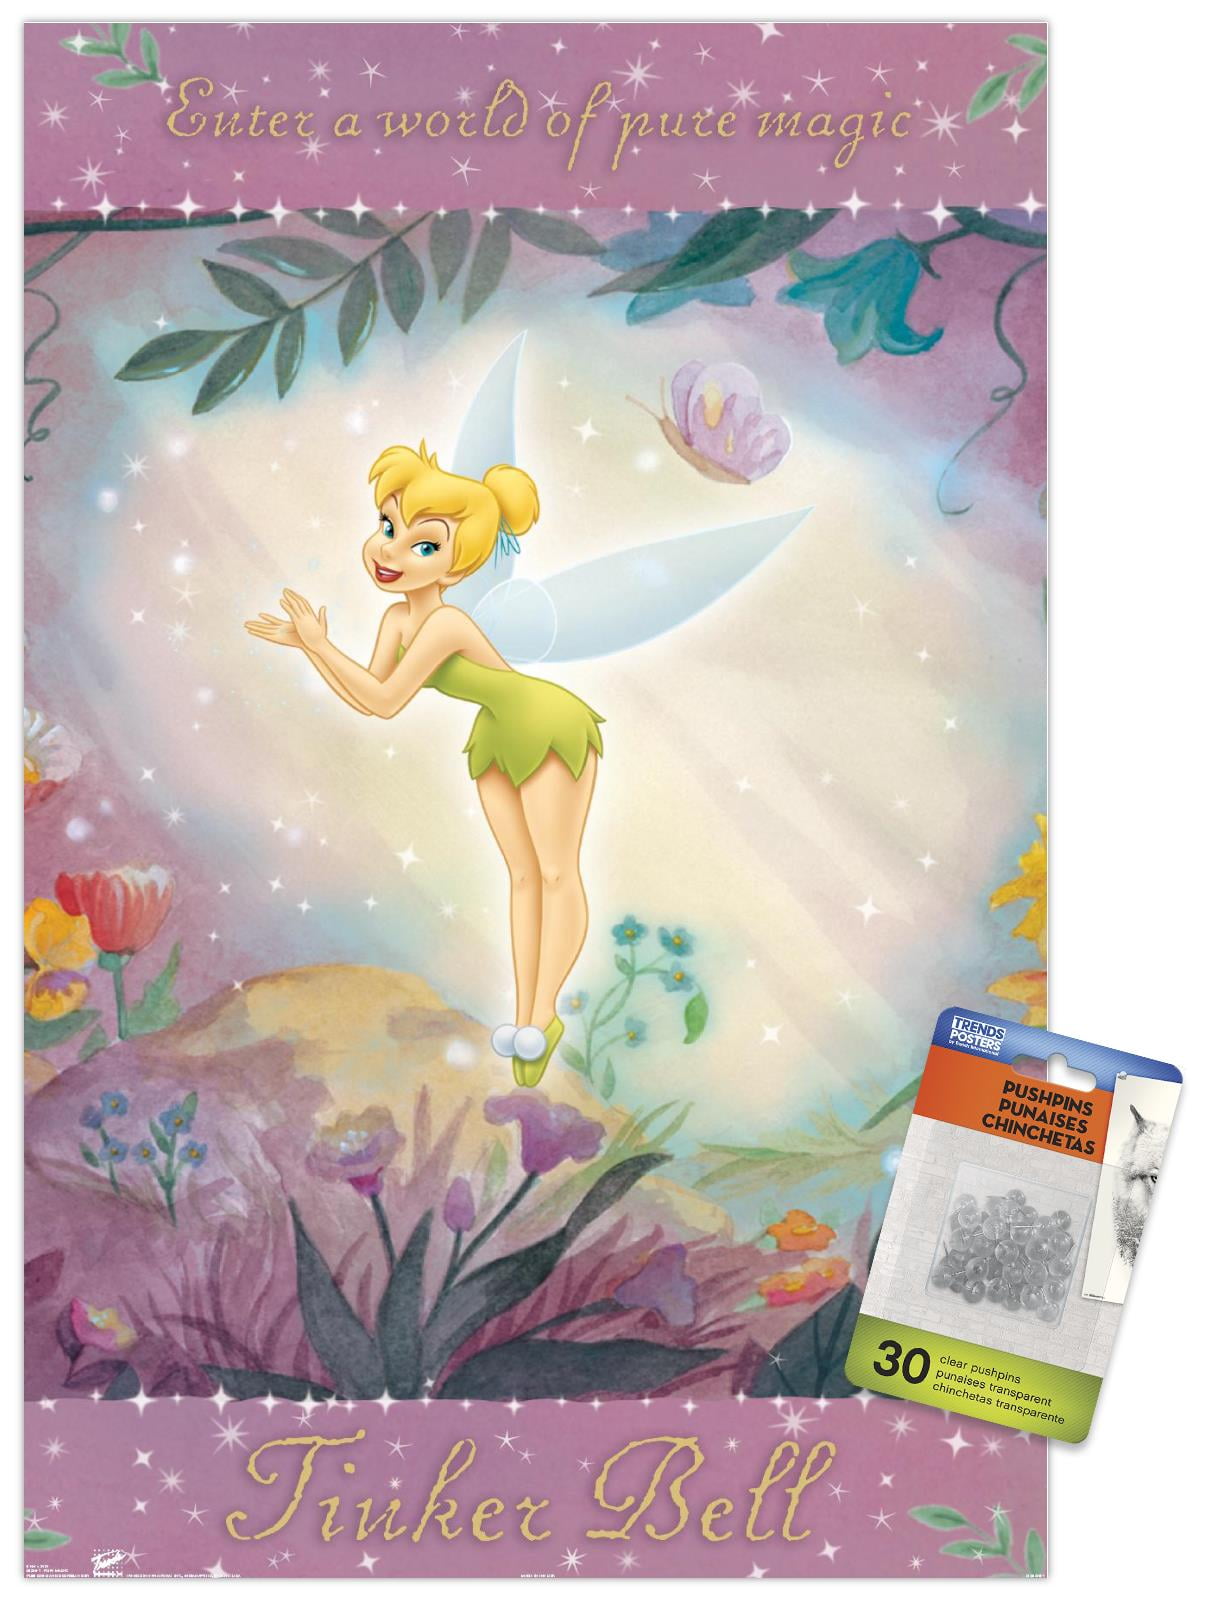 SECRET OF THE WINGS POSTER 5330 B14 OR 22 X 34 DISNEY FAIRIES